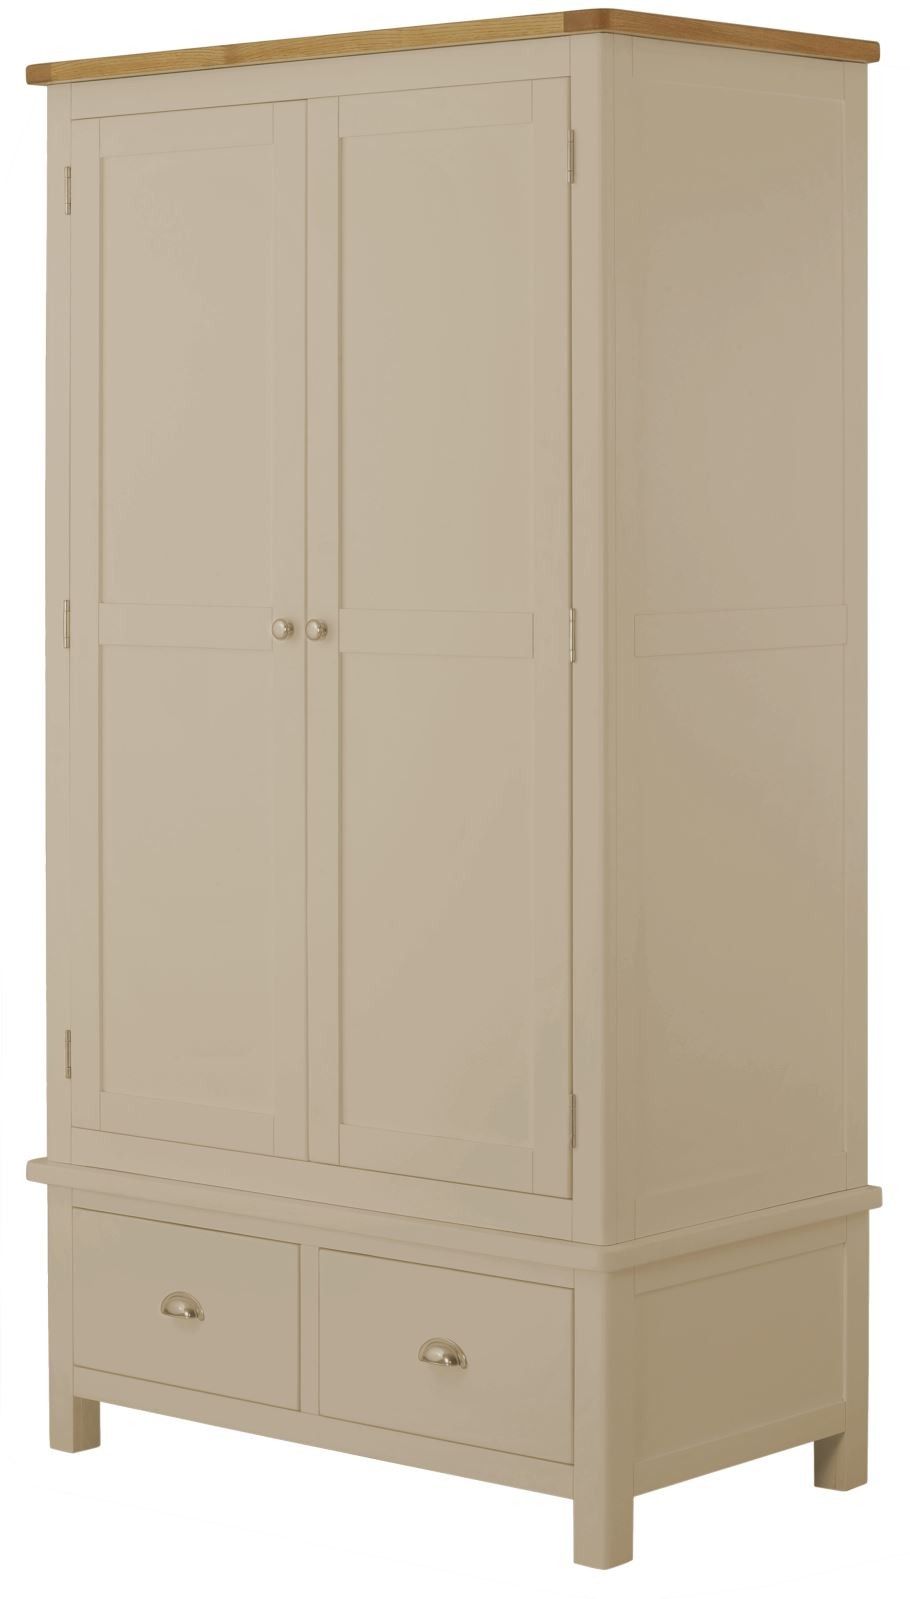 Purbeck Painted 2 Door 2 Drawer Wardrobe - Stone